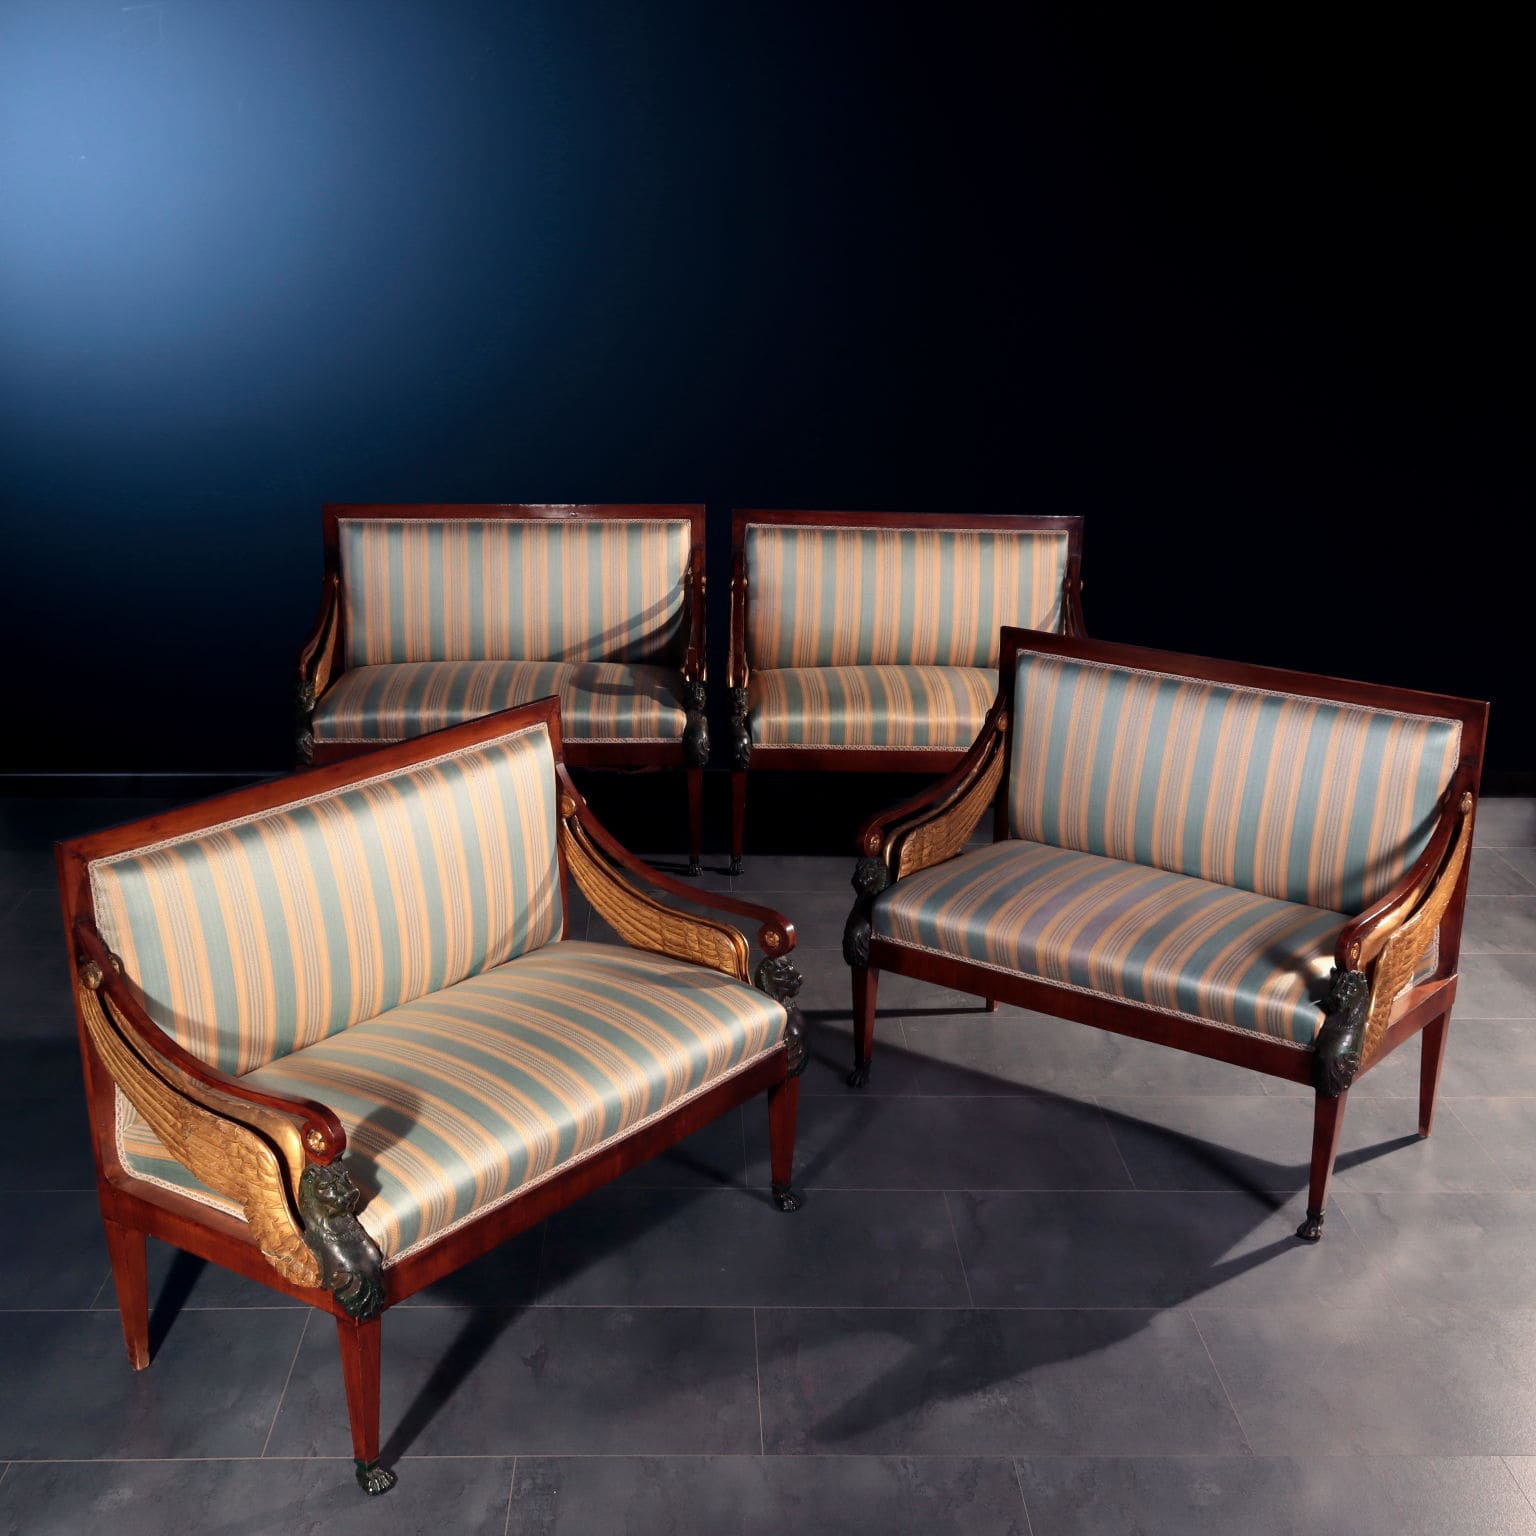 Group of four settees, Veneto, First quarter of the 19th century